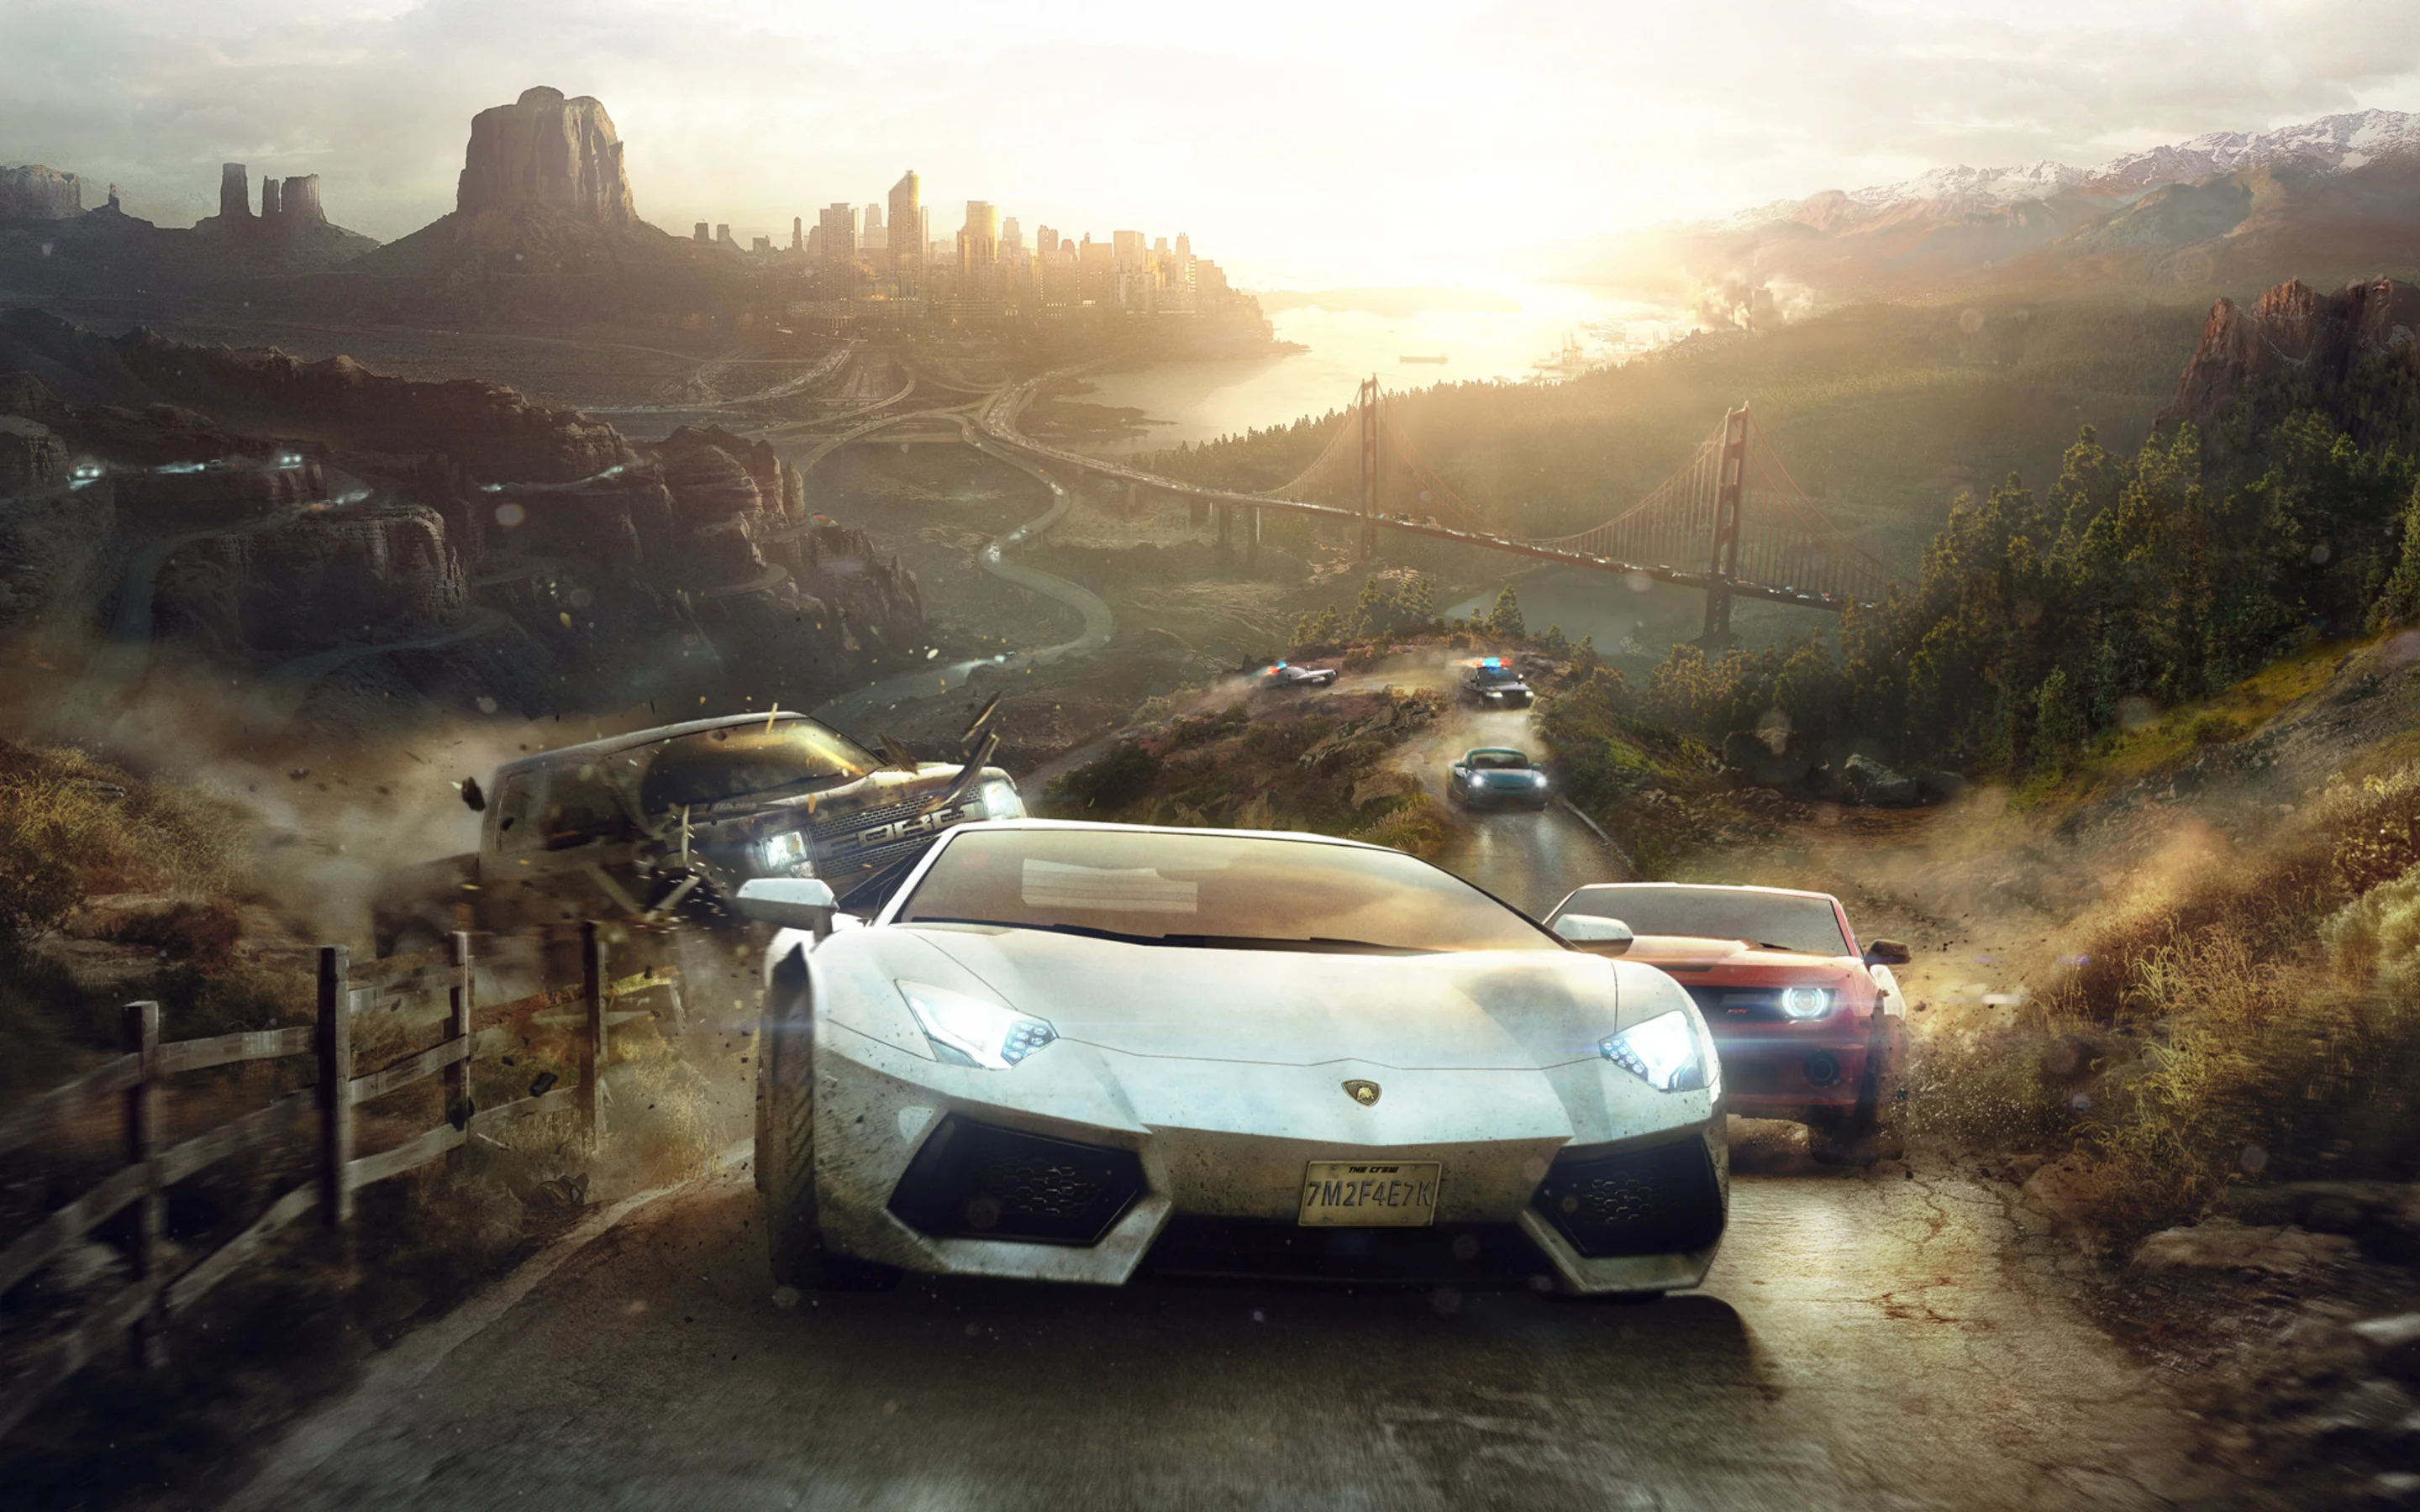 The Crew race is out. The developers have disabled the game servers